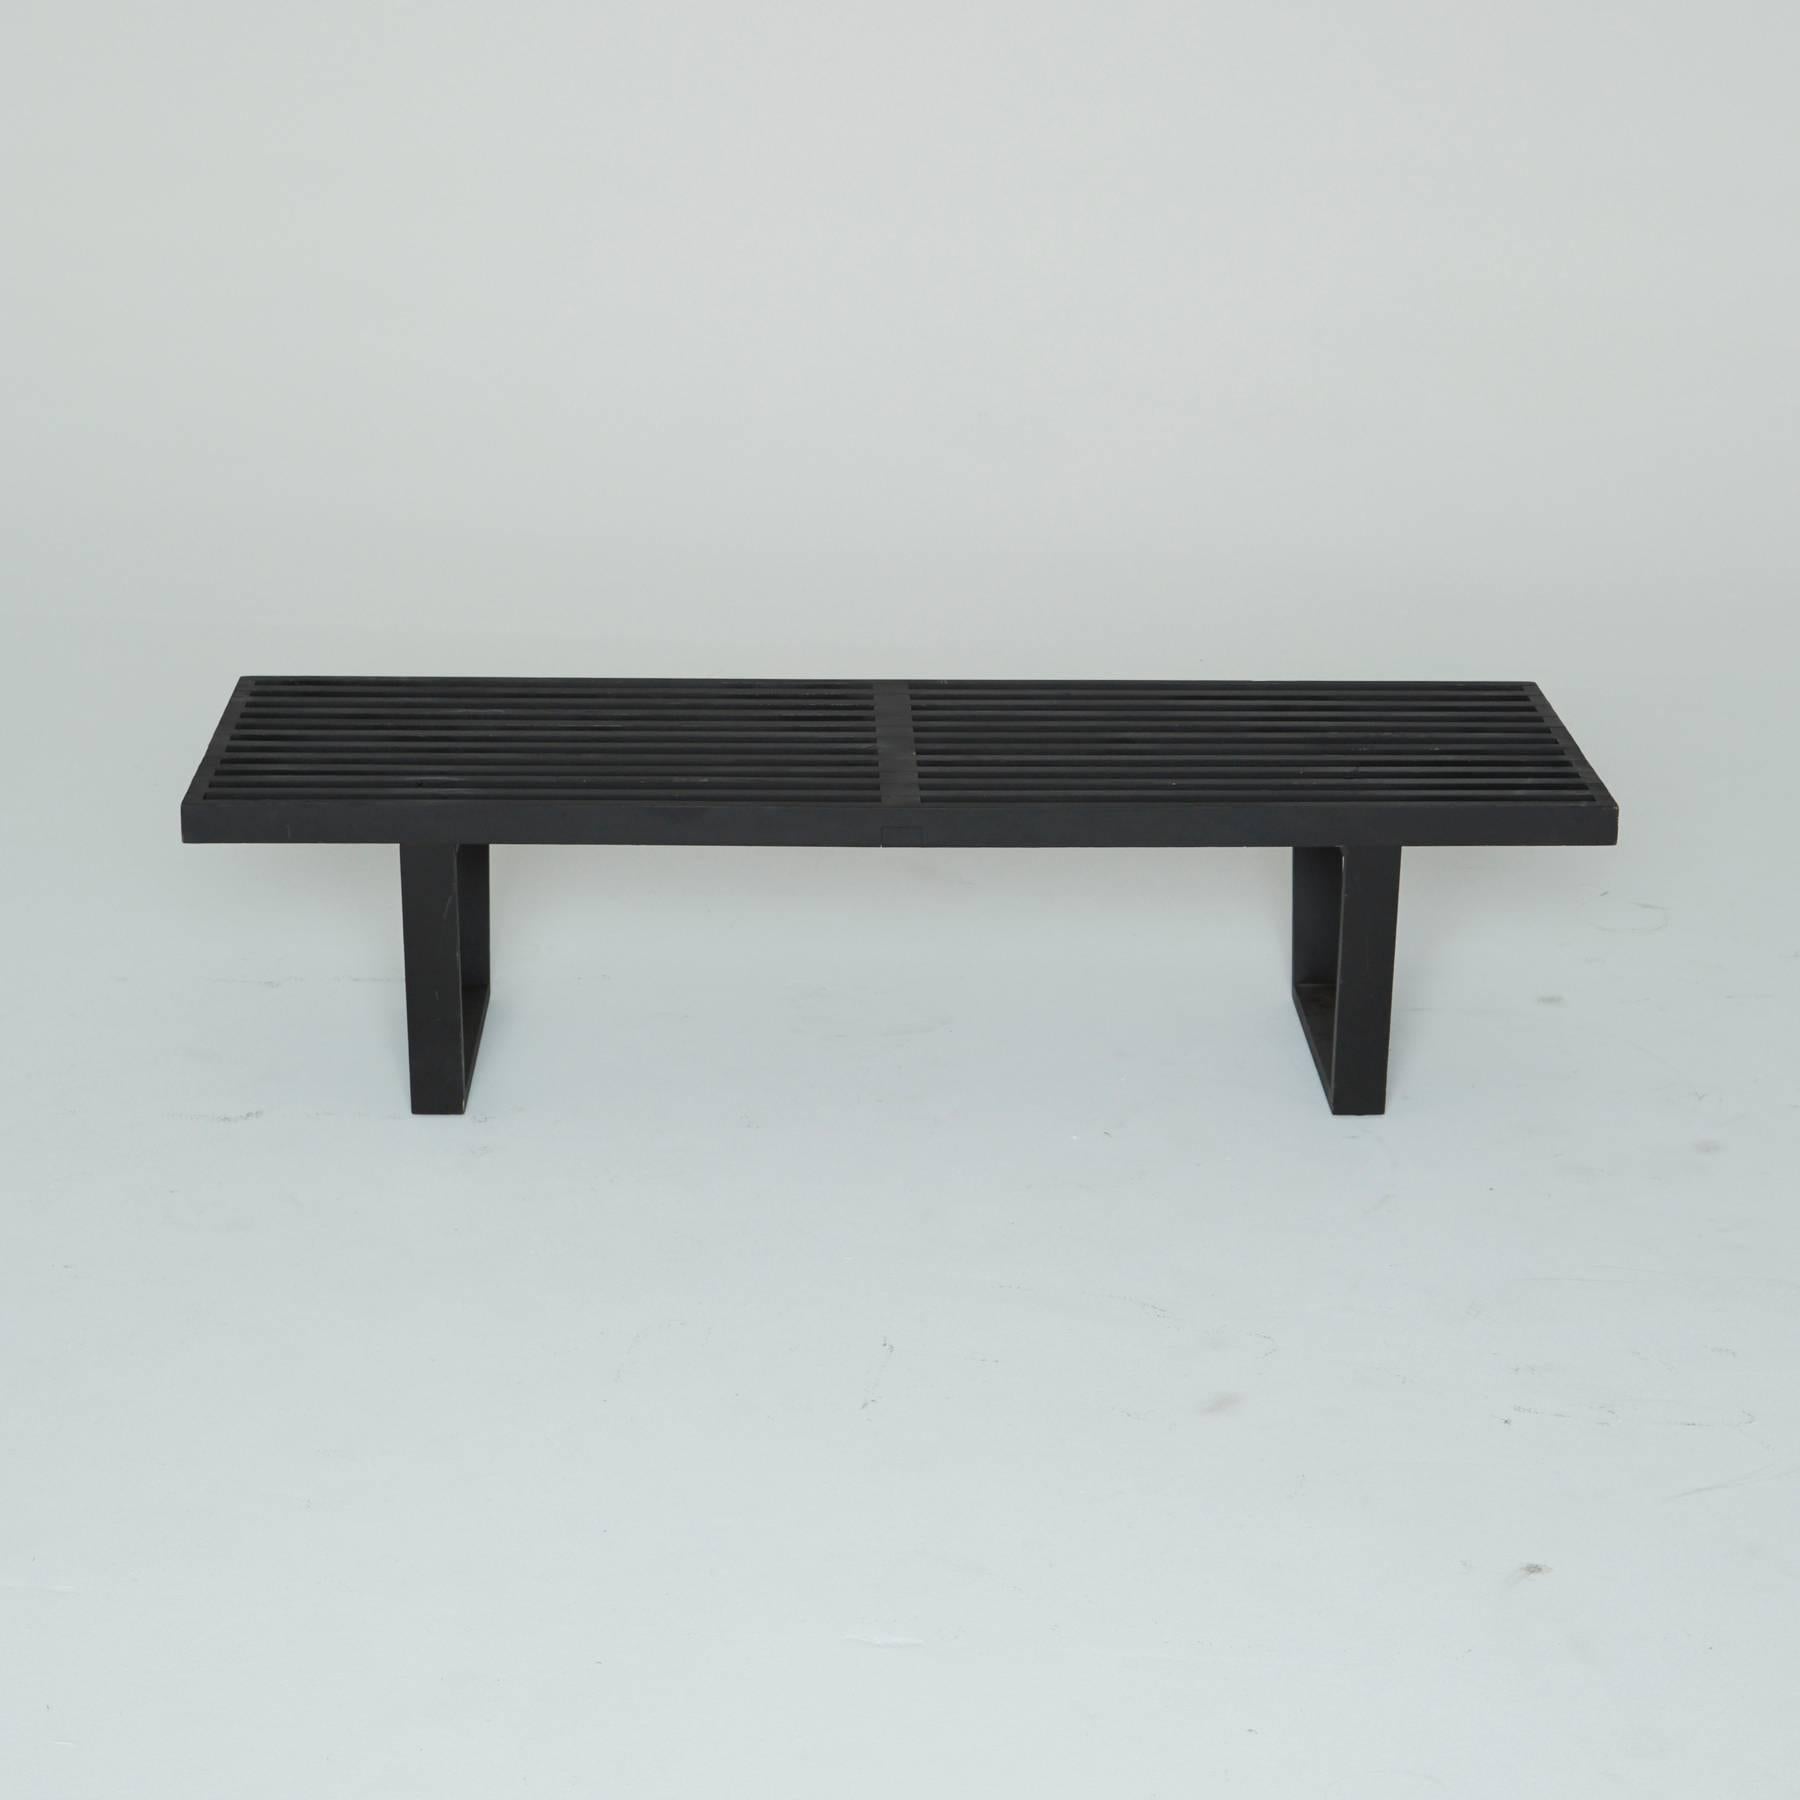 One of the most dynamic designs of mid century furniture, created by George Nelson for Herman Miller. This black lacquered wood bench has a slatted surface and two supportive trapezoids that create the stylish legs. 

This versatile item can be